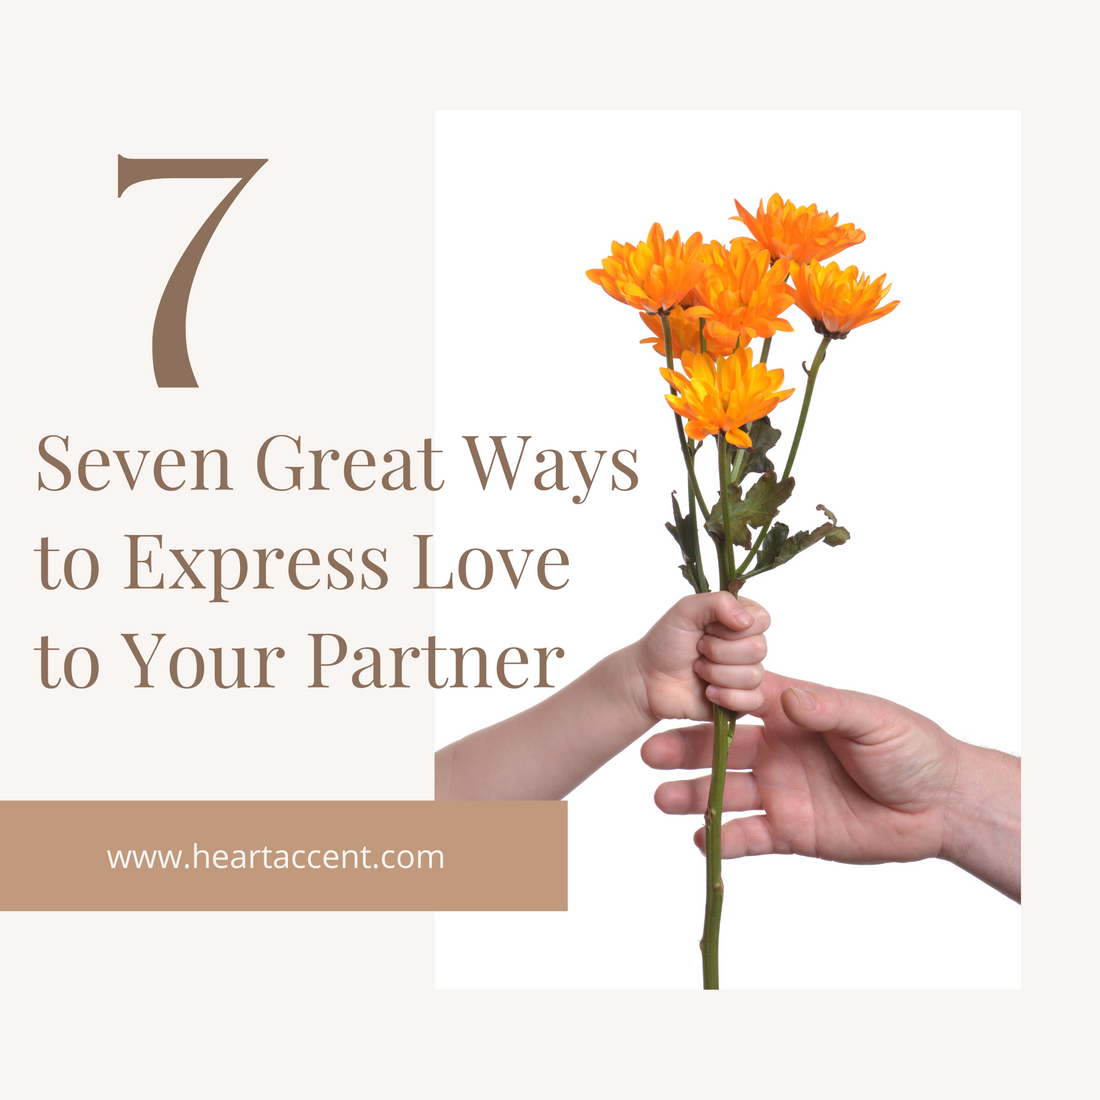 Seven Great Ways to Express Love to Your Partner